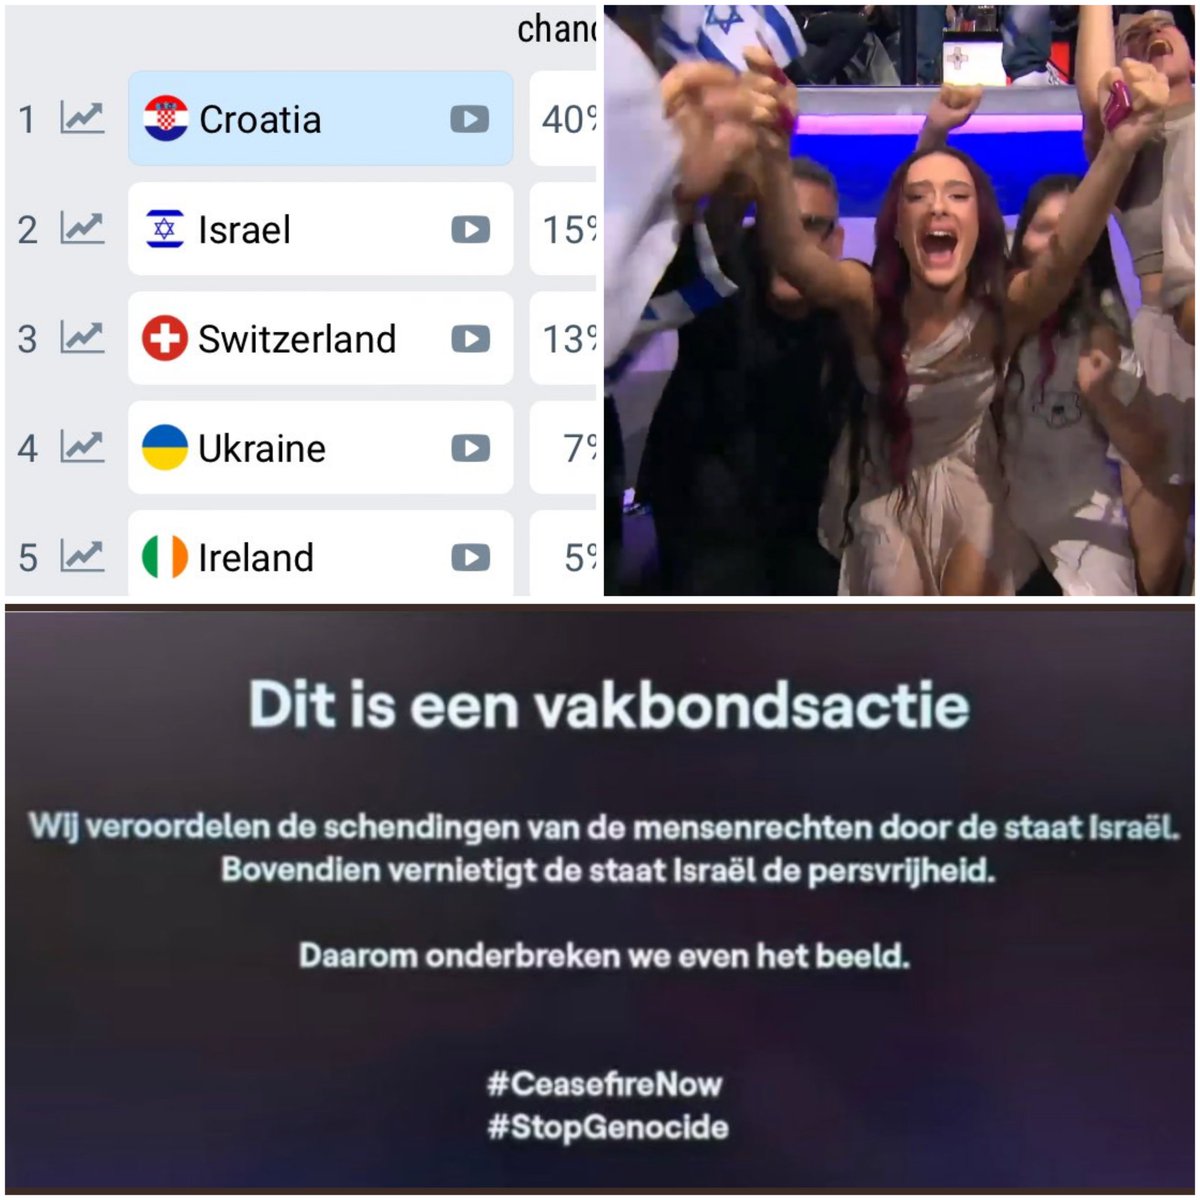 Belgium started their Eurovision broadcast yesterday with a message of condemnation against the State of Israel, accusations of genocide and violation of human rights. At the end of the broadcast, they already found out that they were eliminated from the competition and Israel